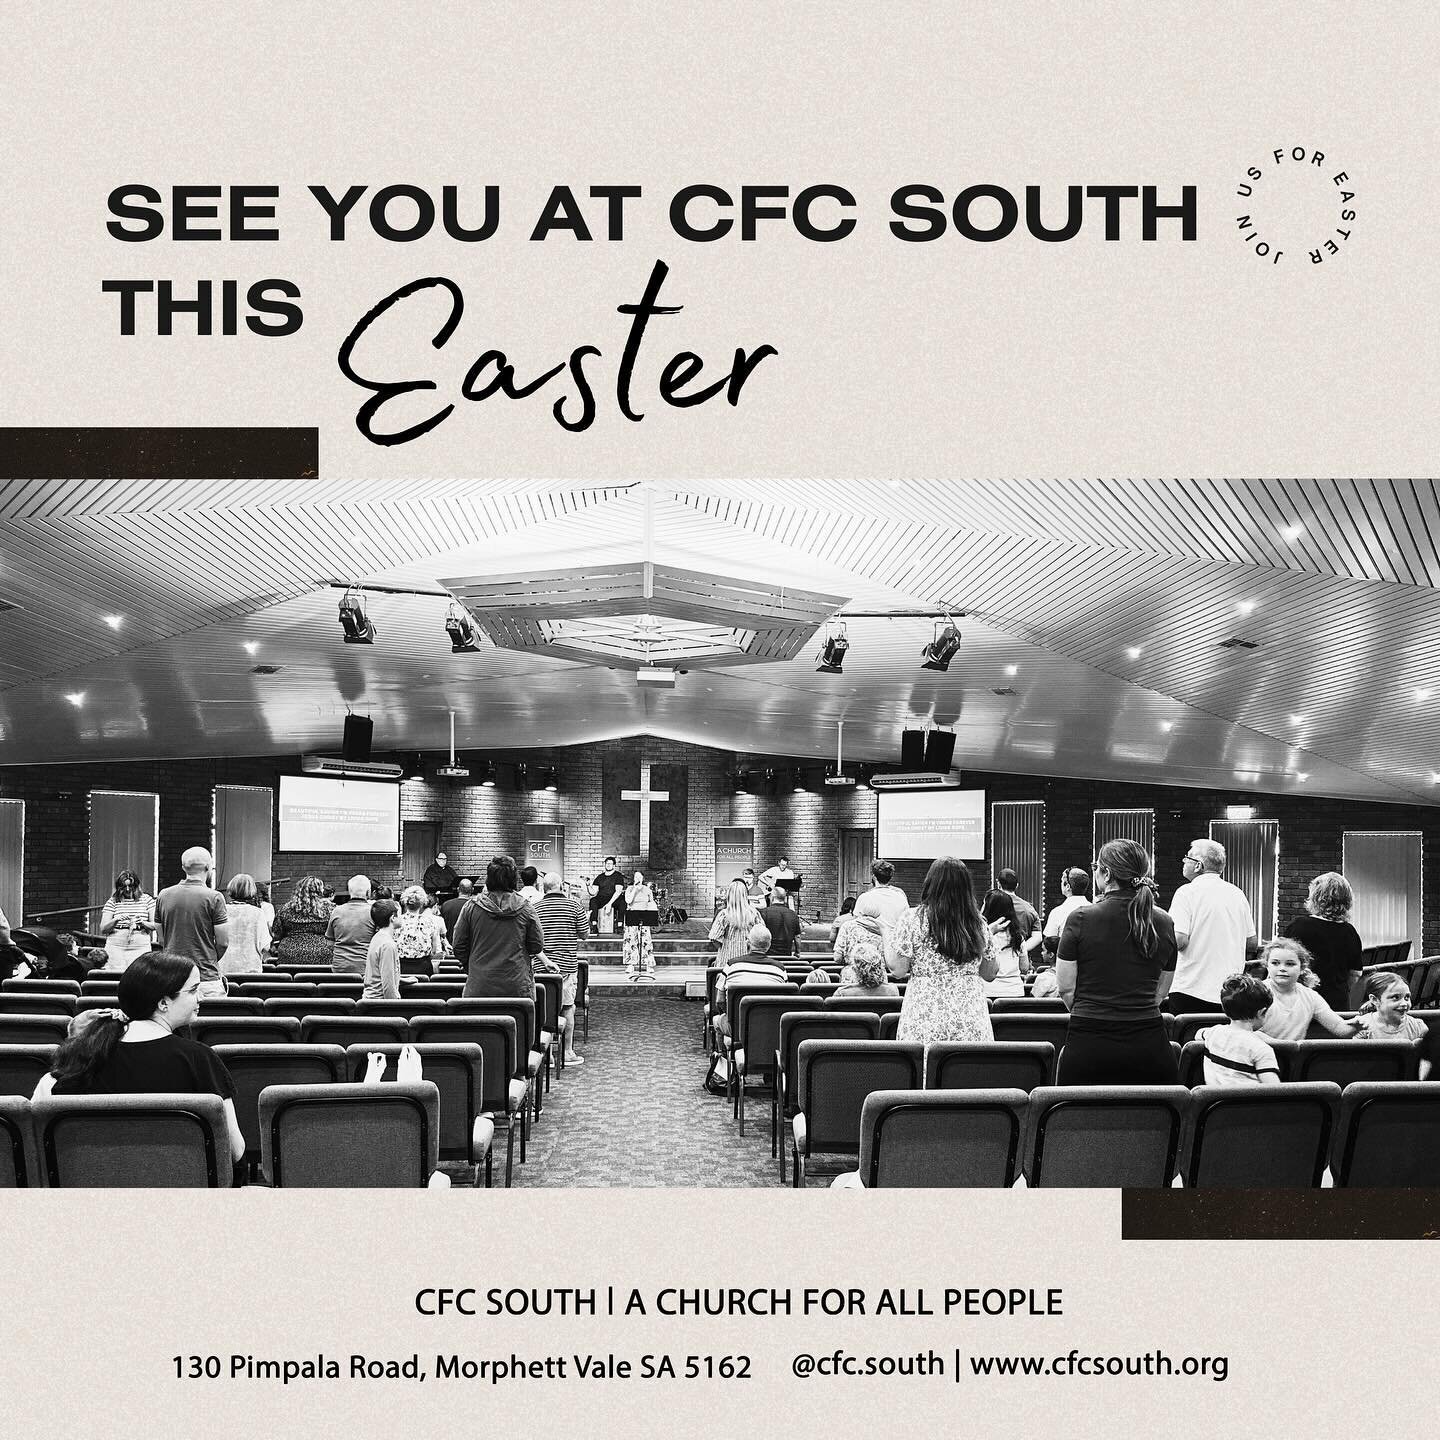 Join us this Easter @cfc.south 
Encounter God&rsquo;s Love.
Consider the real Jesus.
Explore the reason for Hope.

Good Friday, March 29th at 9am.
Inspiring Music.
An Easter Message, from Pastor David Bland.
Communion.
And after the service we invite